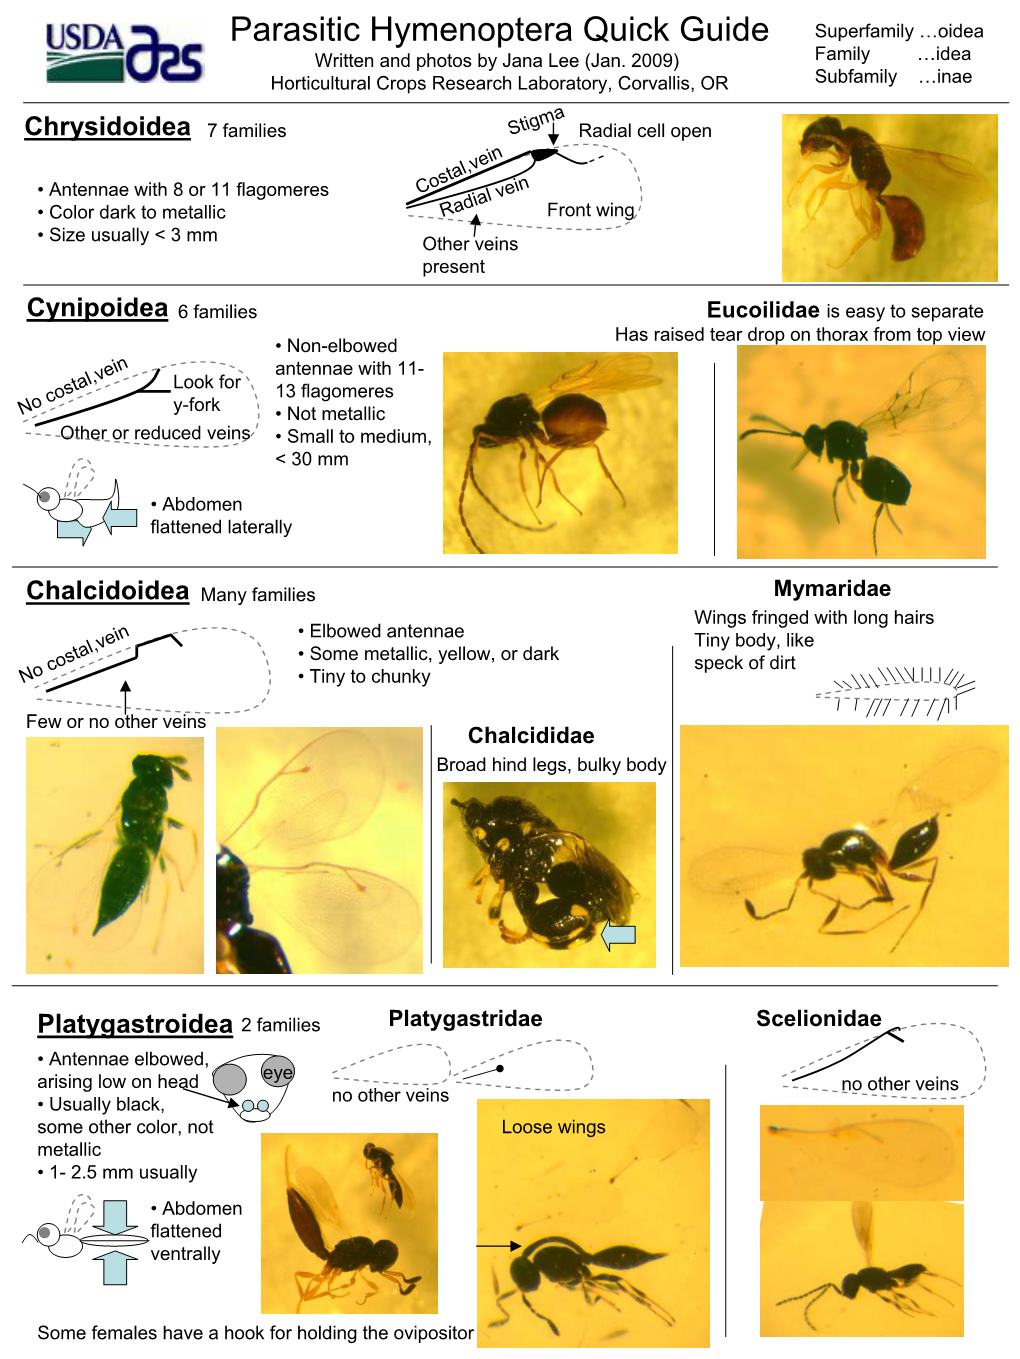 Parasitic Hymenoptera Quick Guide Superfamily …Oidea Written and Photos by Jana Lee (Jan